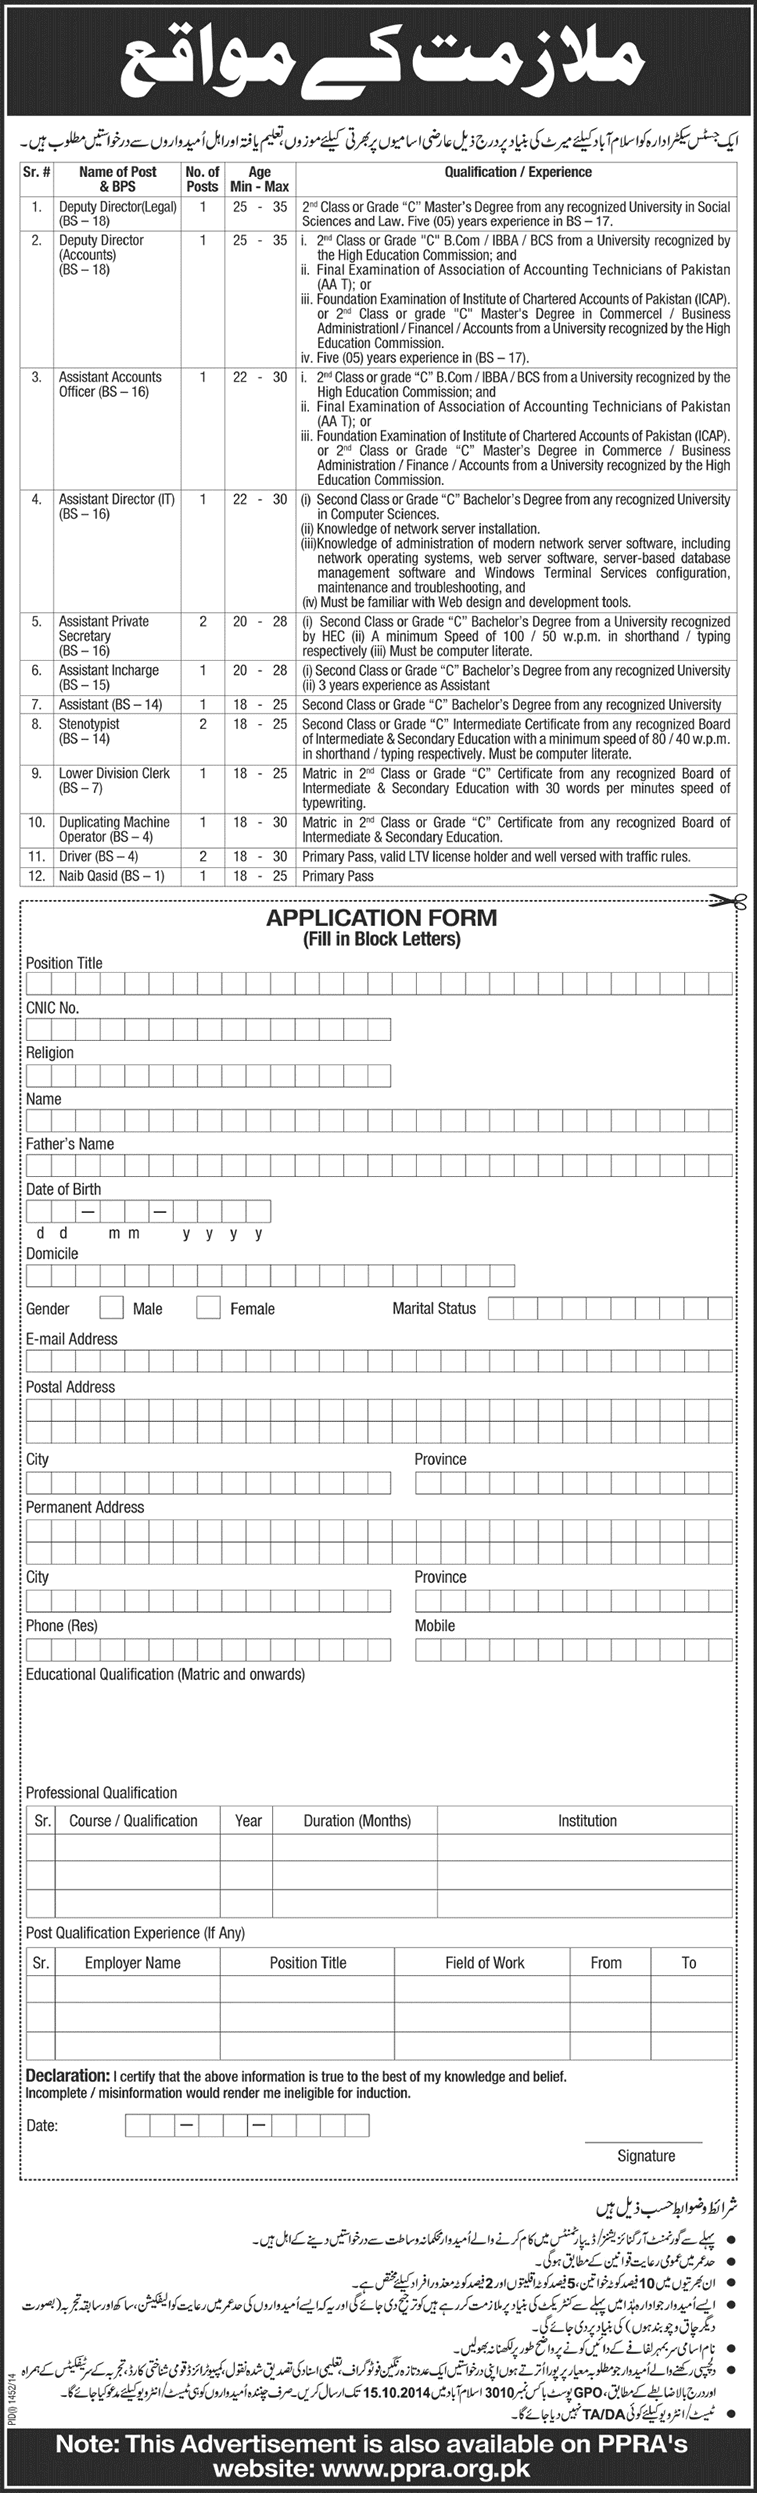 PO Box 3010 GPO Islamabad Jobs 2014 September / October Application Form Download